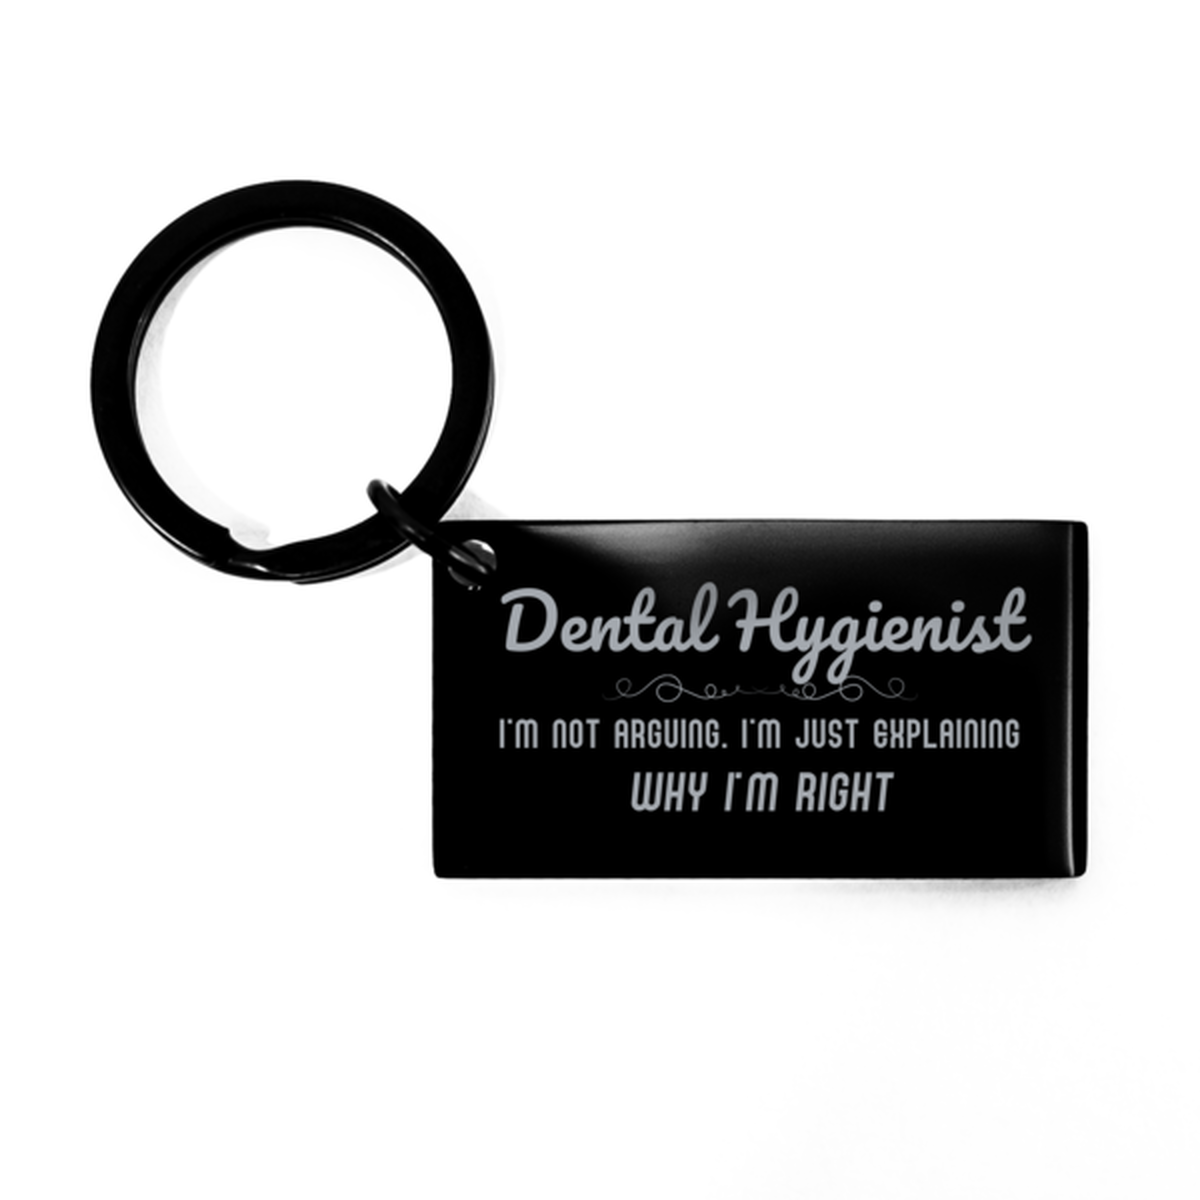 Dental Hygienist I'm not Arguing. I'm Just Explaining Why I'm RIGHT Keychain, Funny Saying Quote Dental Hygienist Gifts For Dental Hygienist Graduation Birthday Christmas Gifts for Men Women Coworker